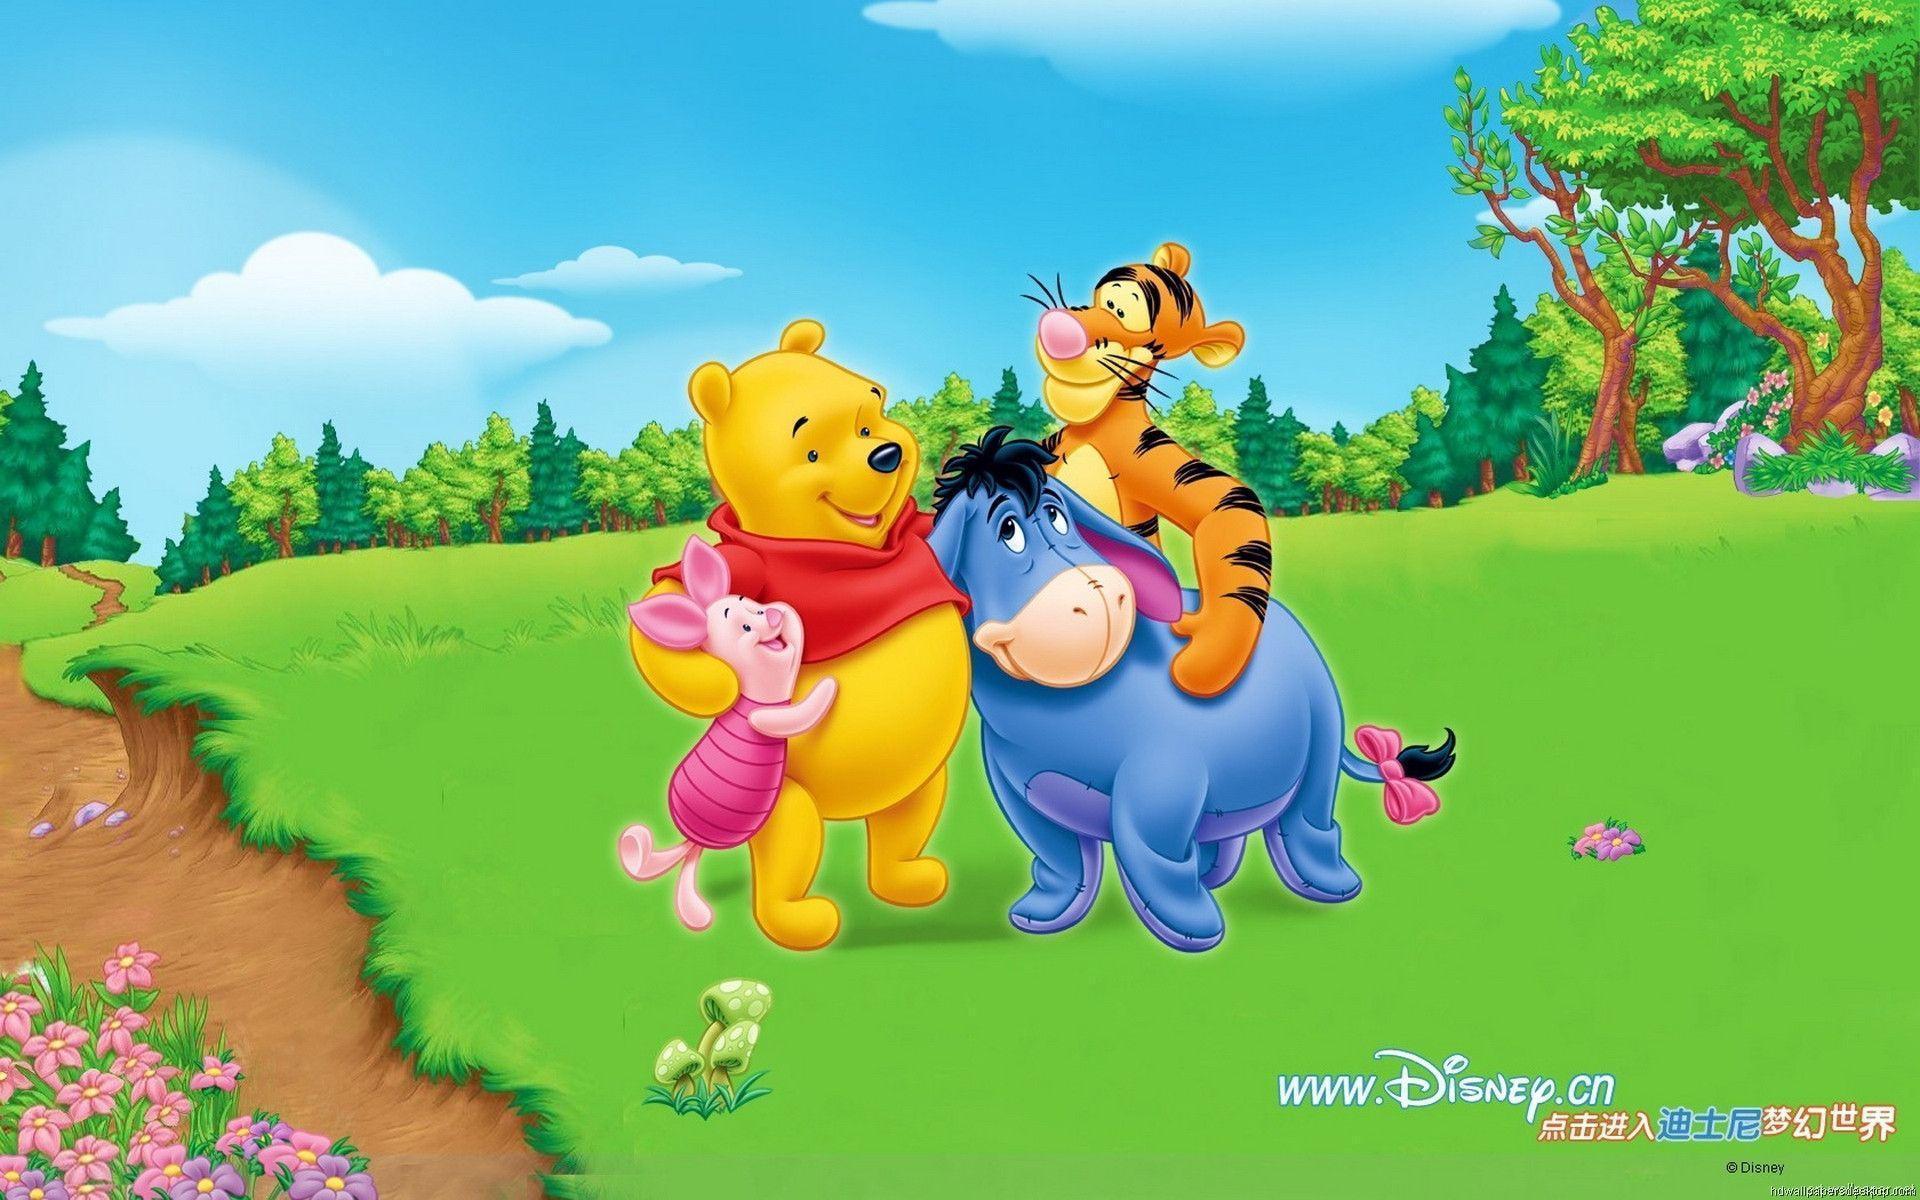 Winnie The Pooh Wallpapers Wallpaper Cave